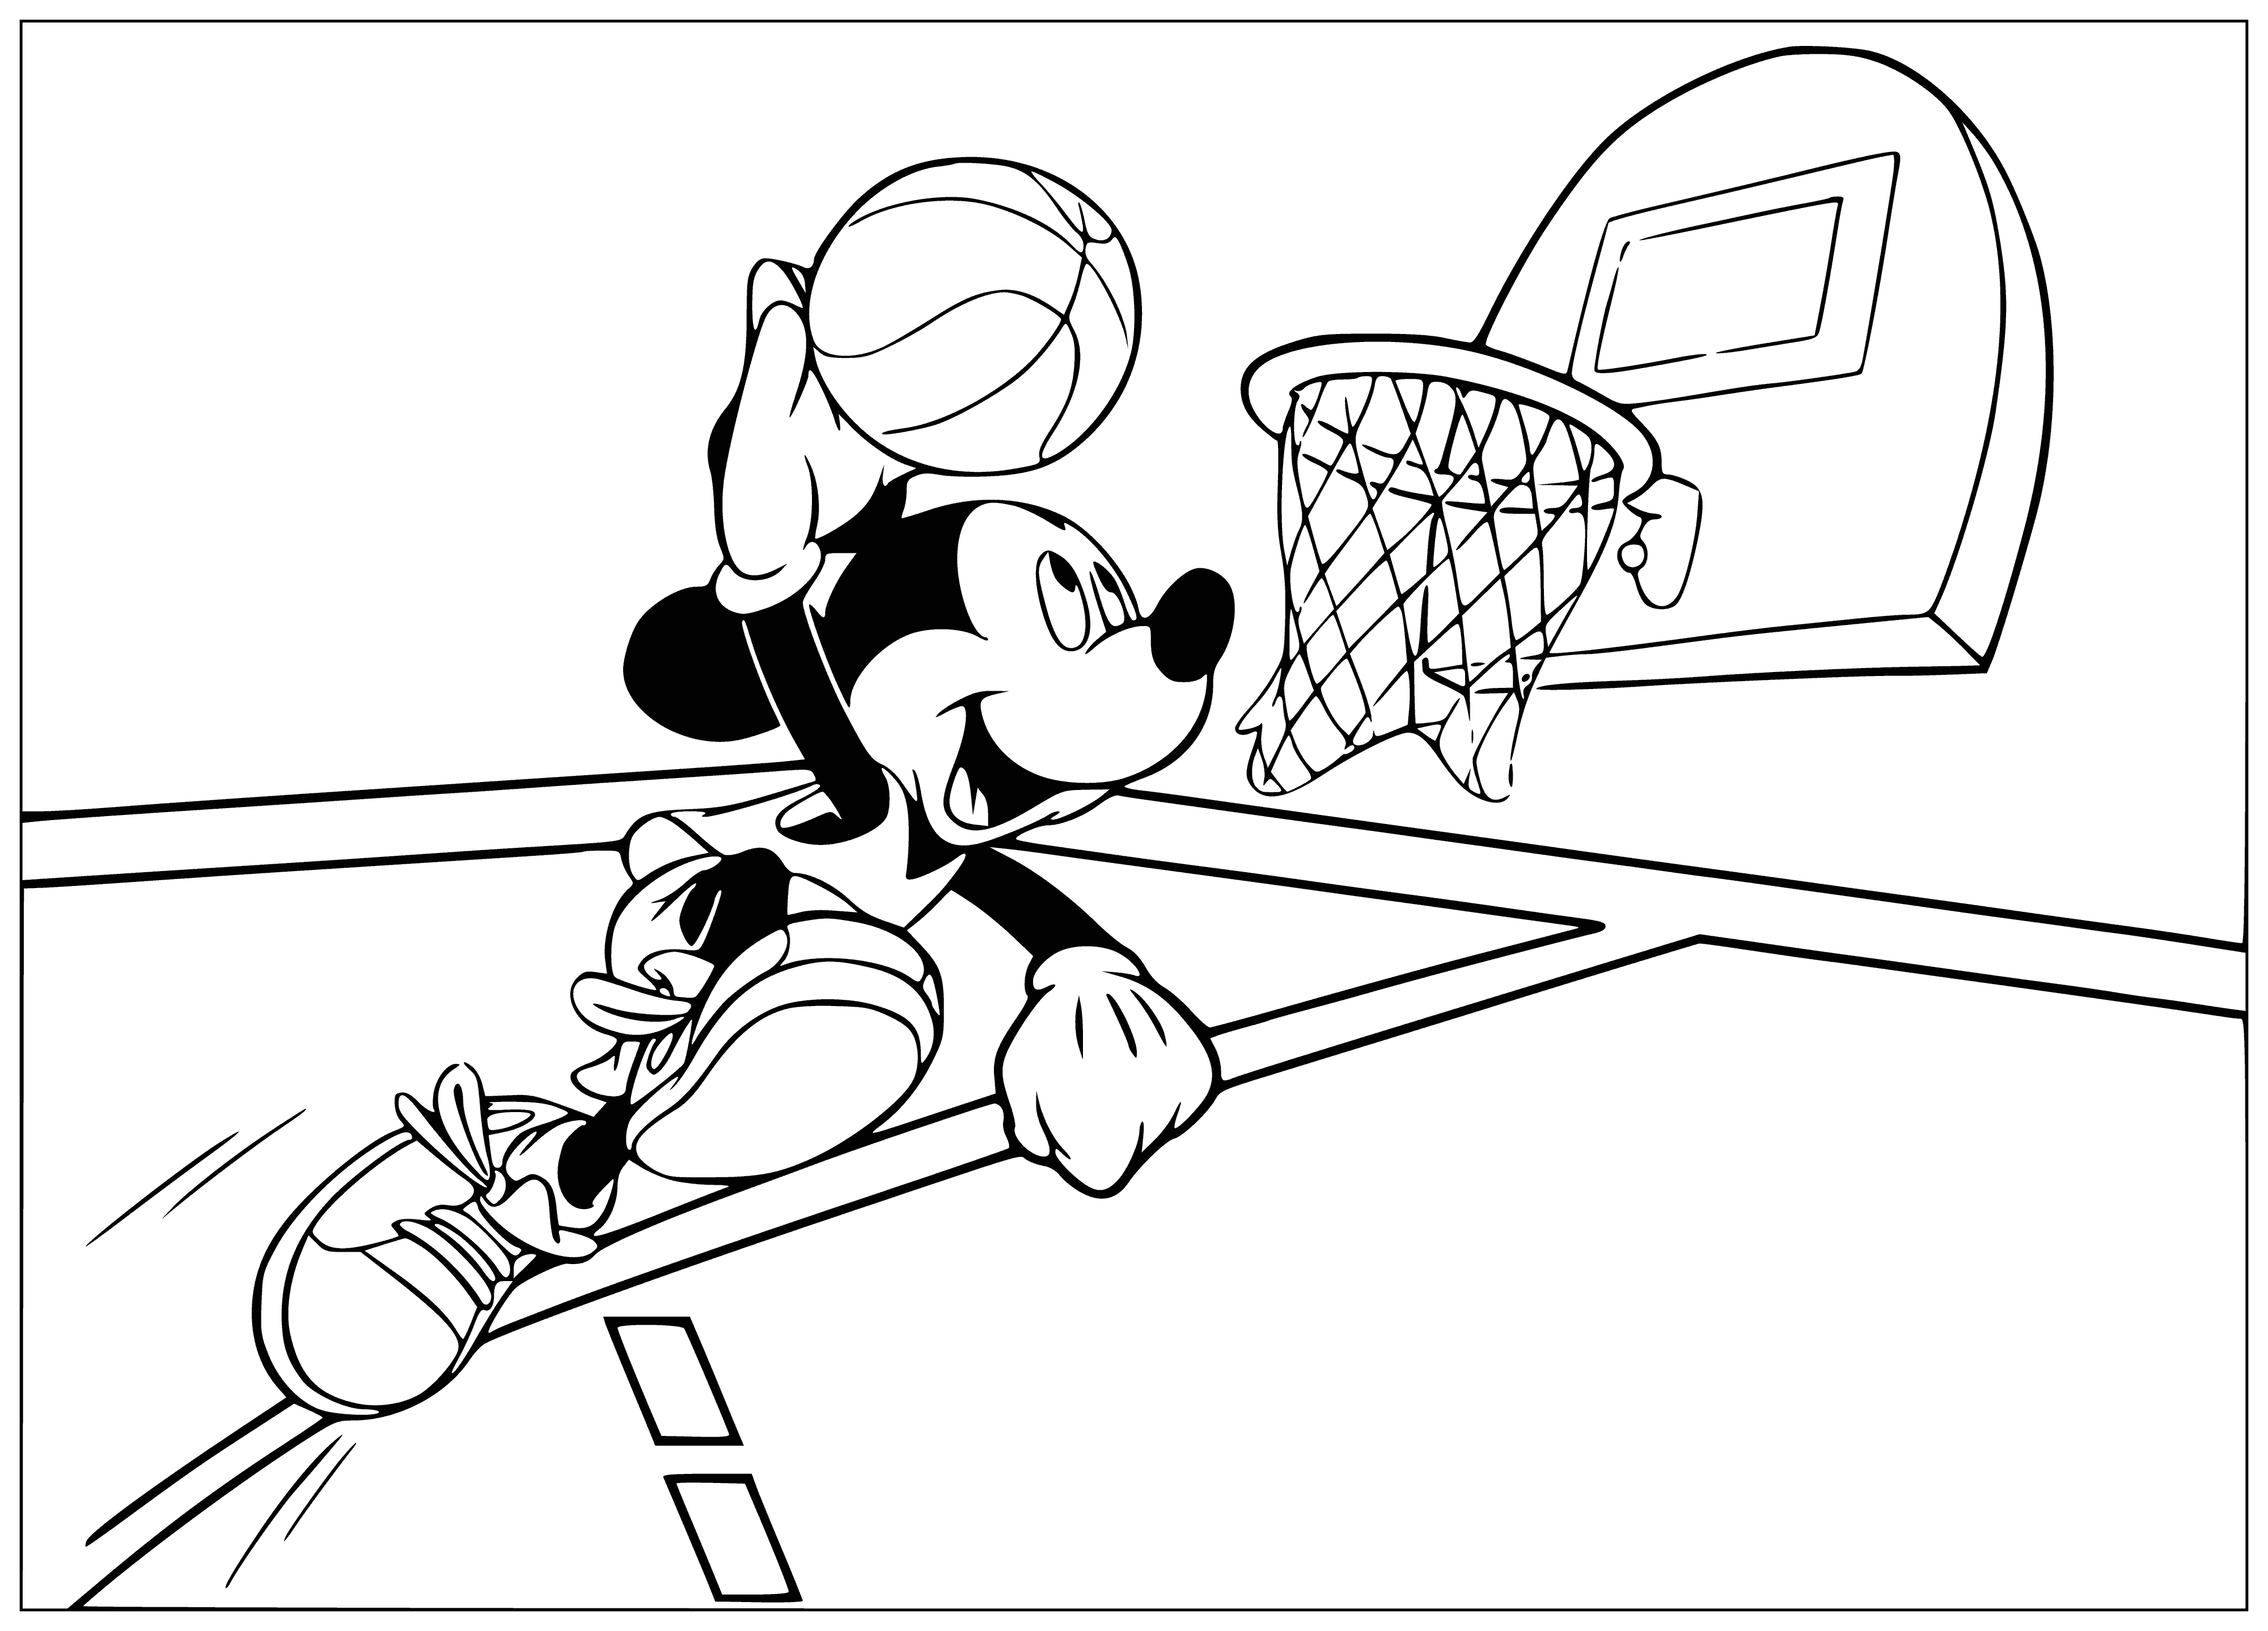 coloring page: A determined basketball player with Mickey Mouse ears, wearing a red and white jersey with the number "33" on it, dribbles a basketball.